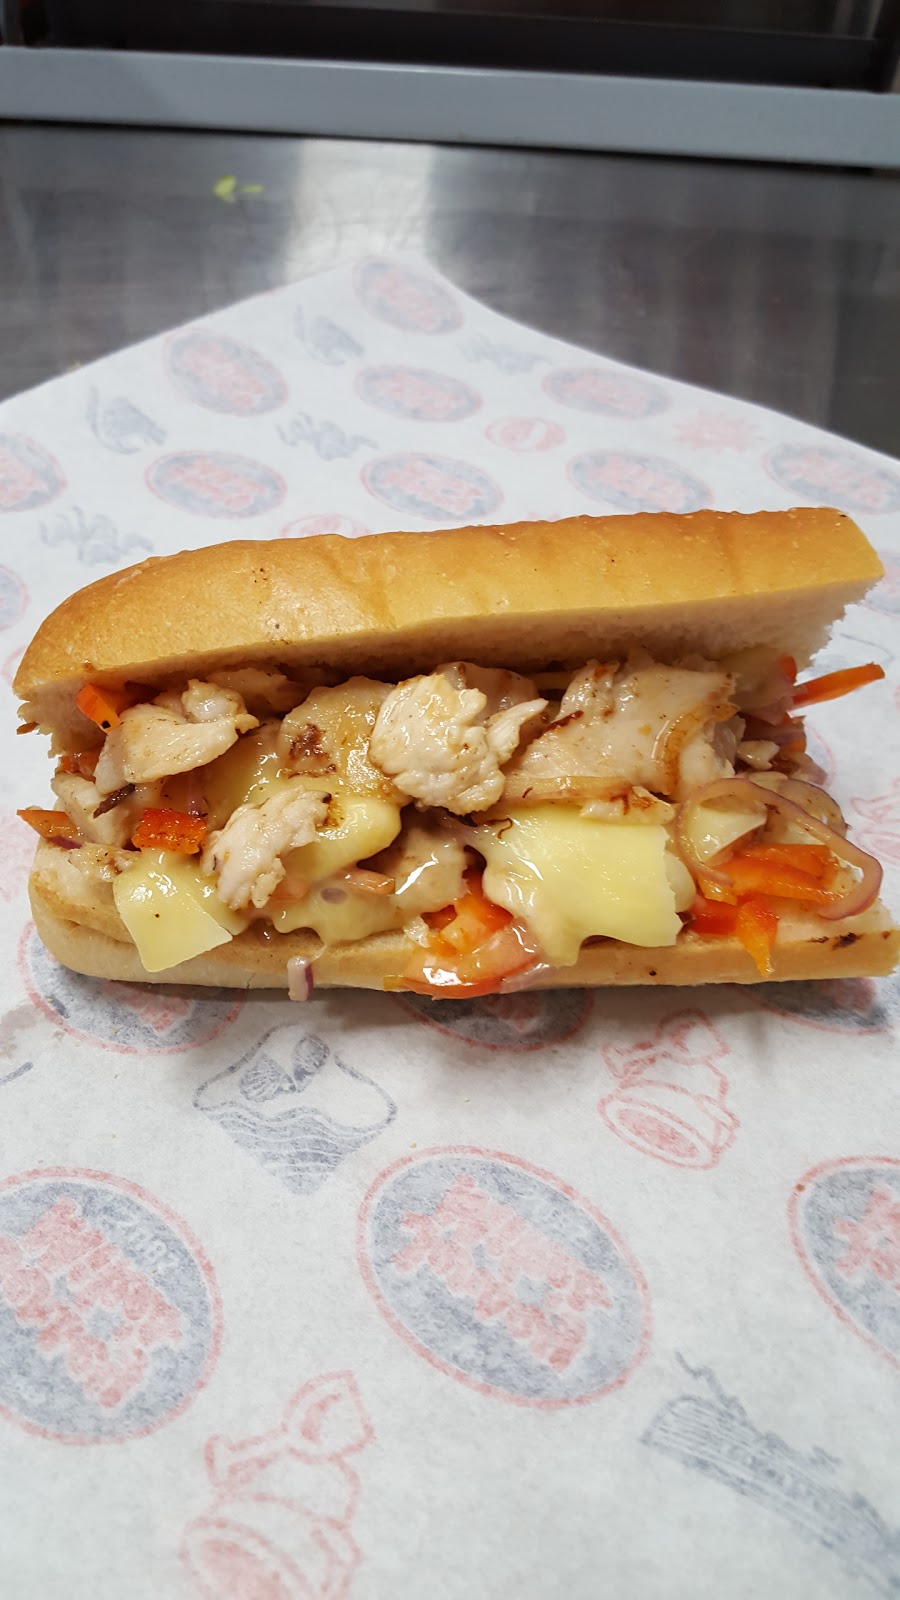 Jersey Mikes Subs | restaurant | Shop A1/14 Allandale Entrance, Mermaid Waters QLD 4218, Australia | 0755723523 OR +61 7 5572 3523